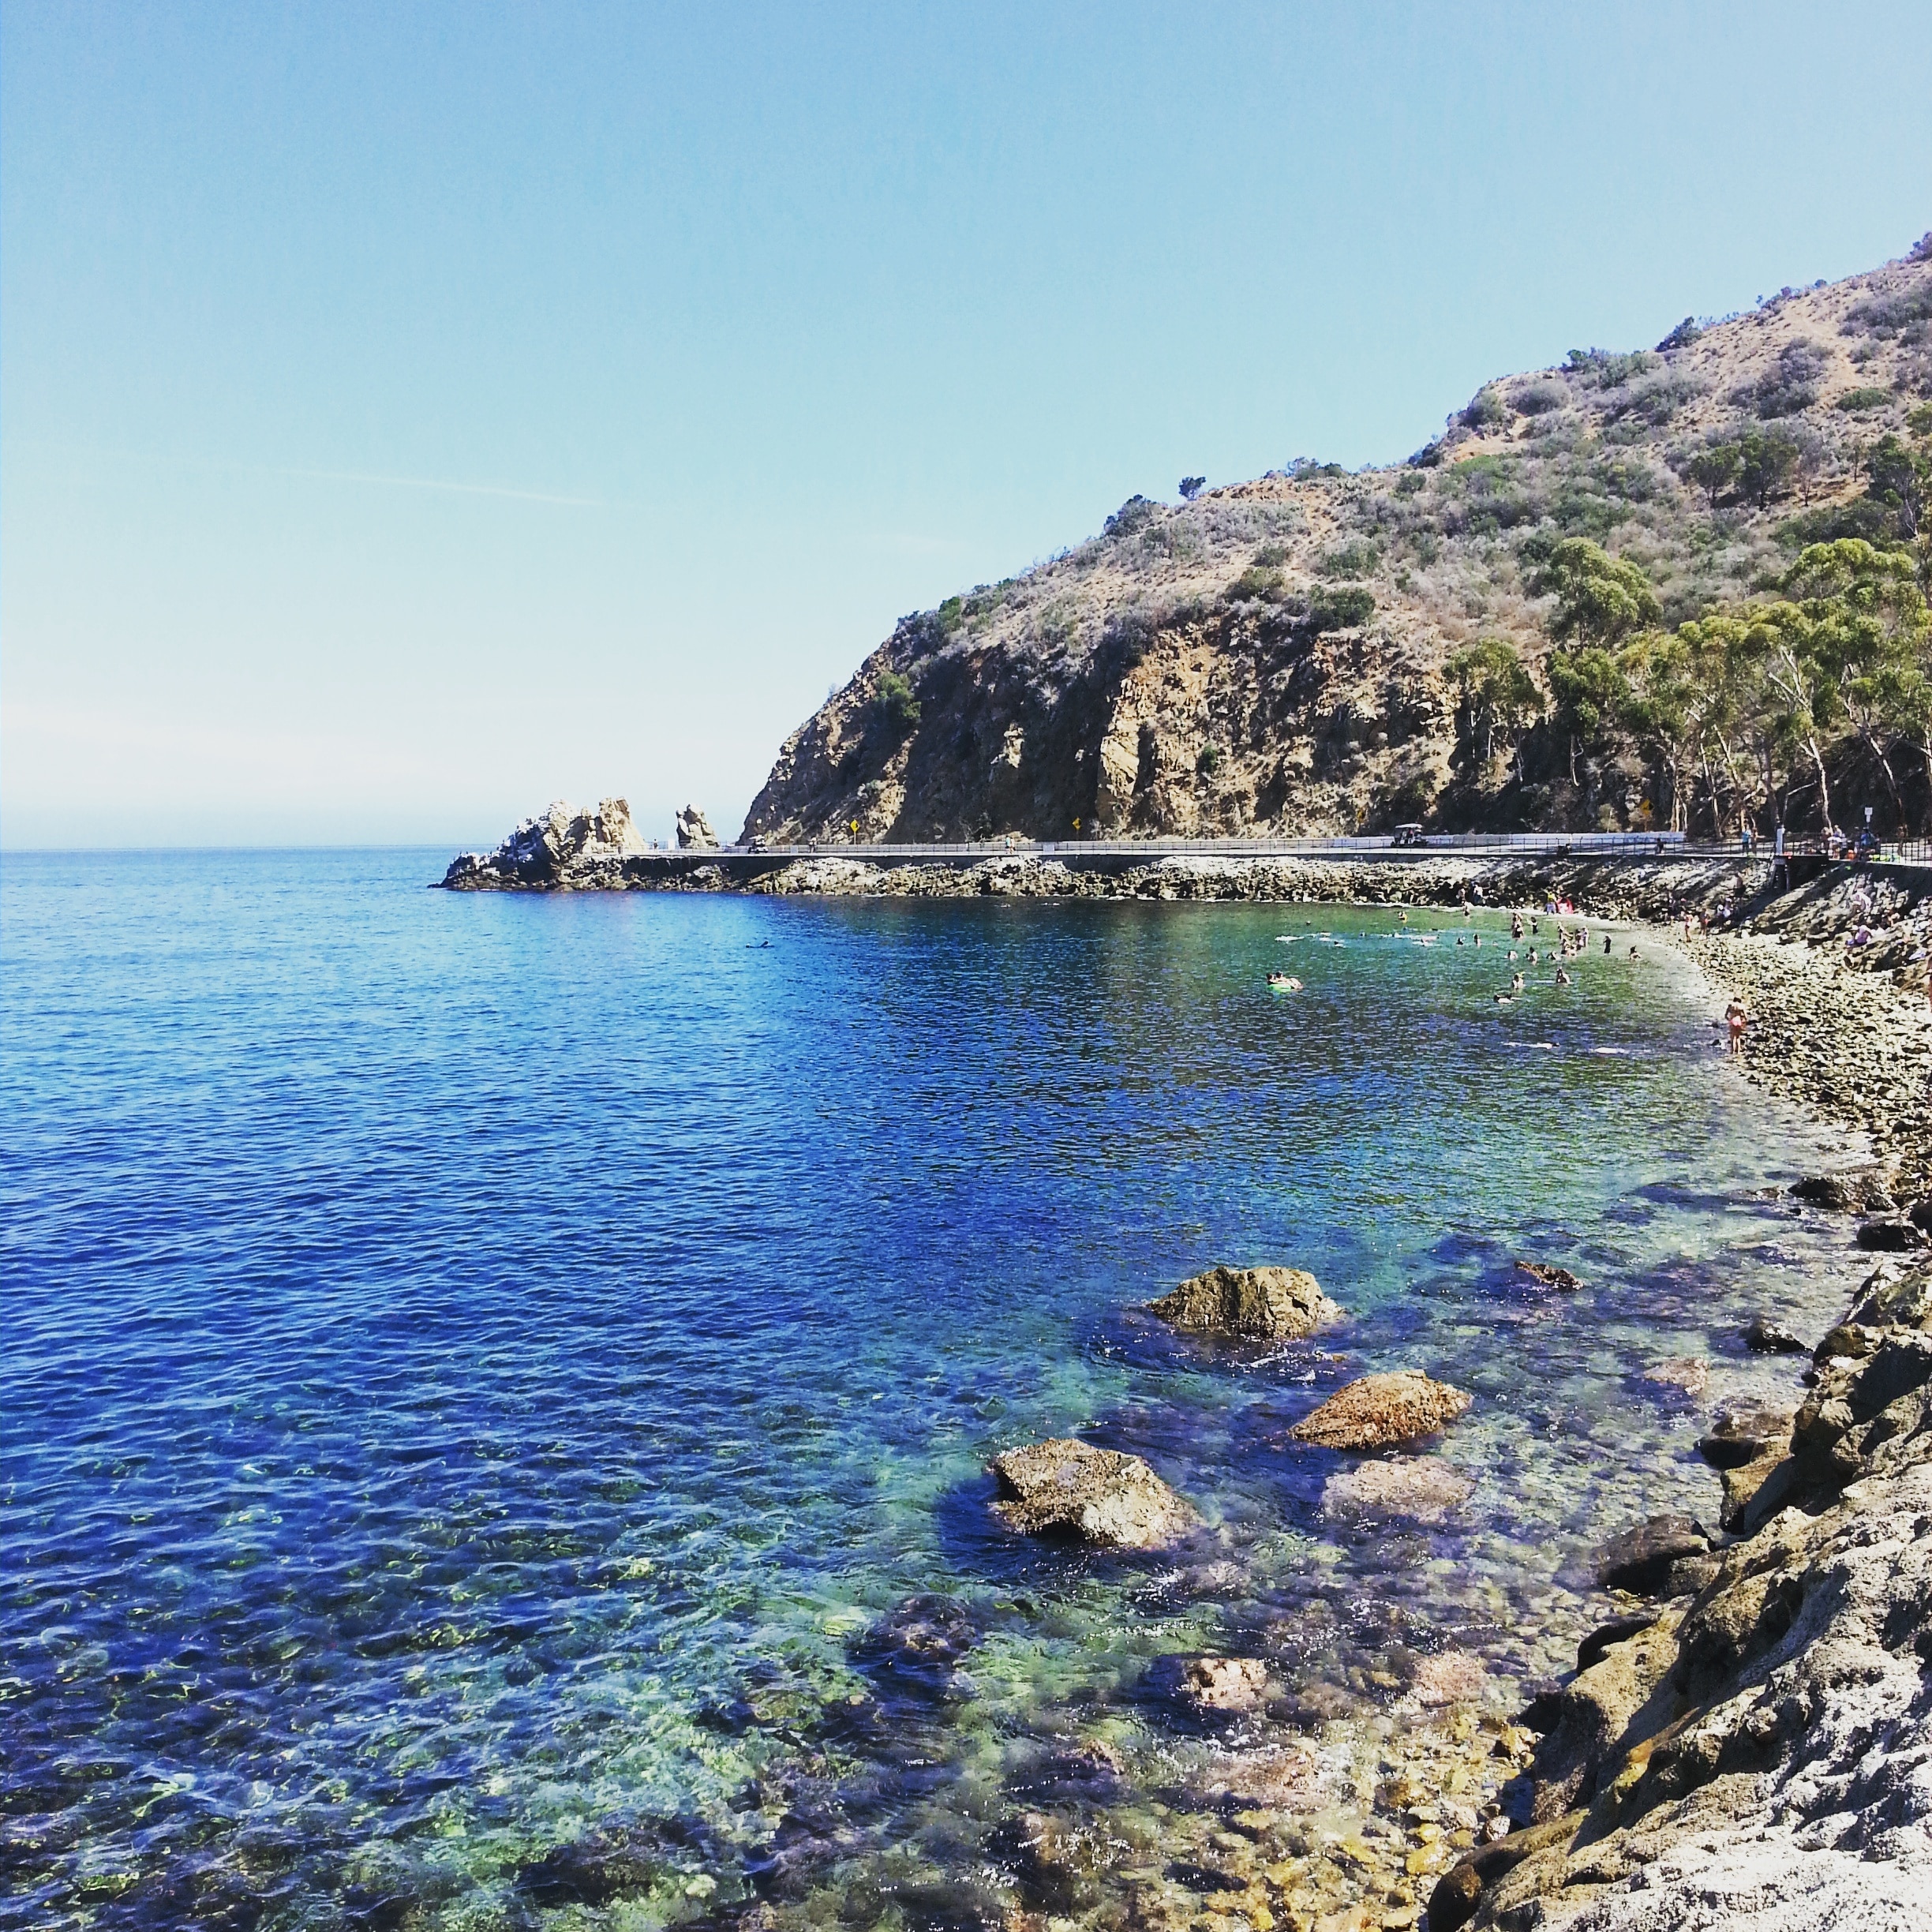 Go snorkeling in the beautiful blue waters of Catalina Island's lover's cove. It's a protected area with lots of corals and sea life. 